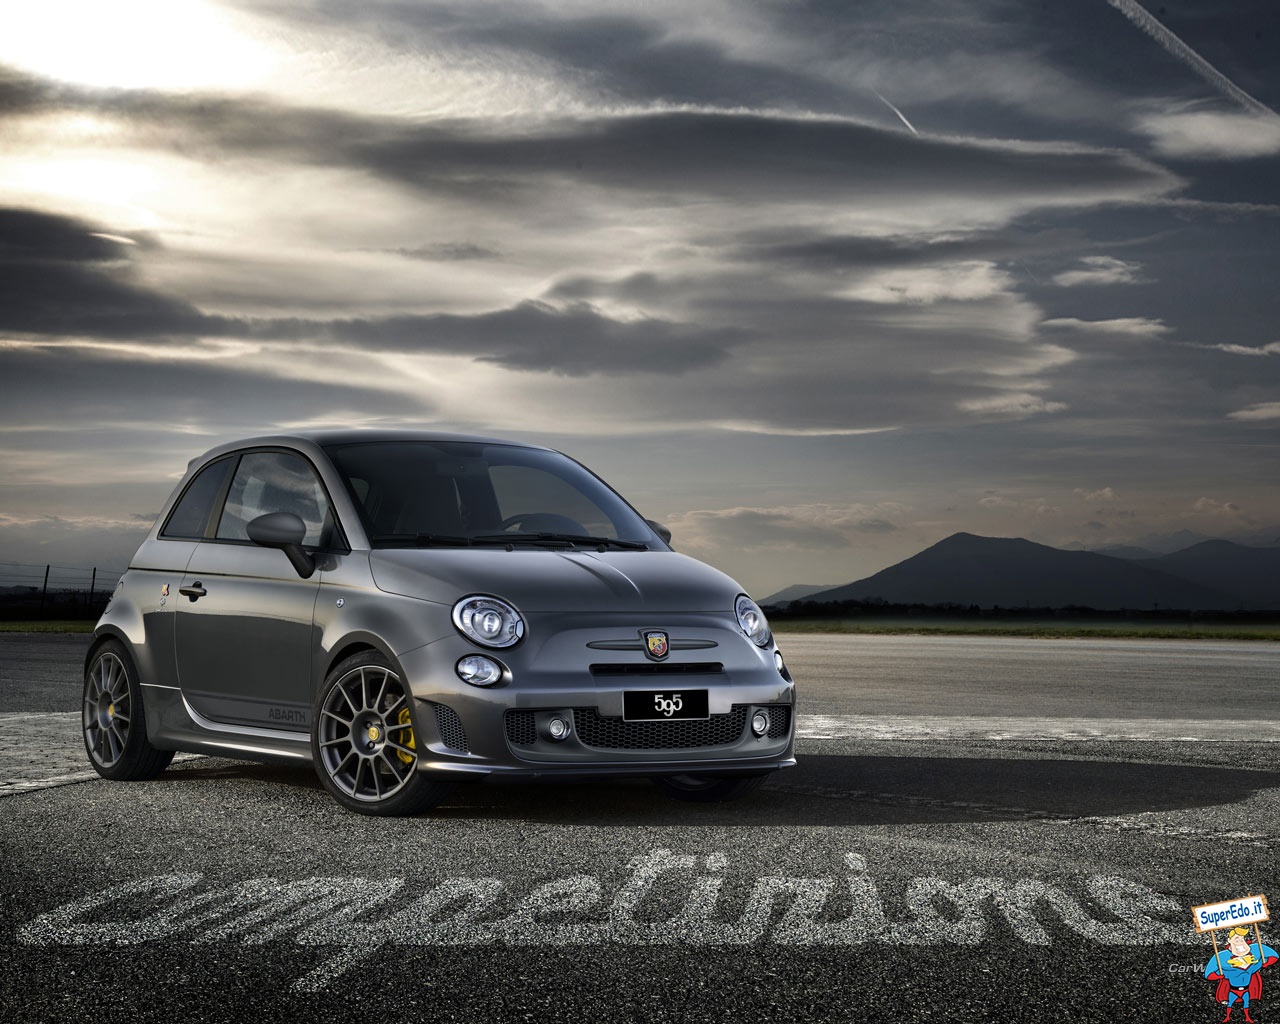 Wallpapers>> Sports Car >> Fiat 500 Abarth Wallpapers - 500 Abarth 595 Competizione , HD Wallpaper & Backgrounds